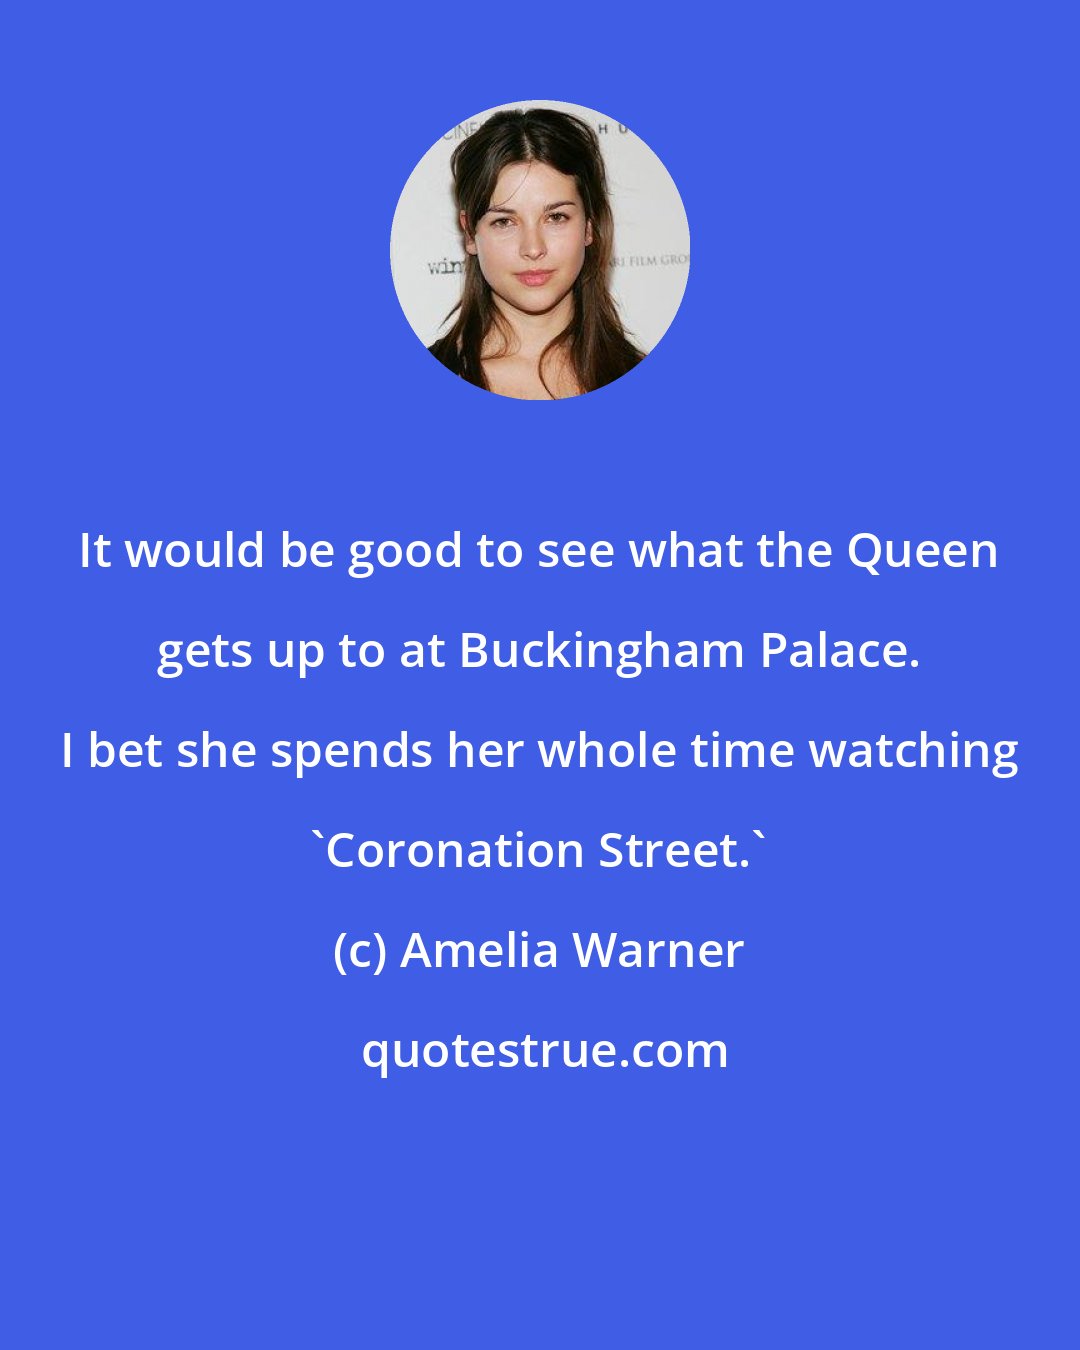 Amelia Warner: It would be good to see what the Queen gets up to at Buckingham Palace. I bet she spends her whole time watching 'Coronation Street.'